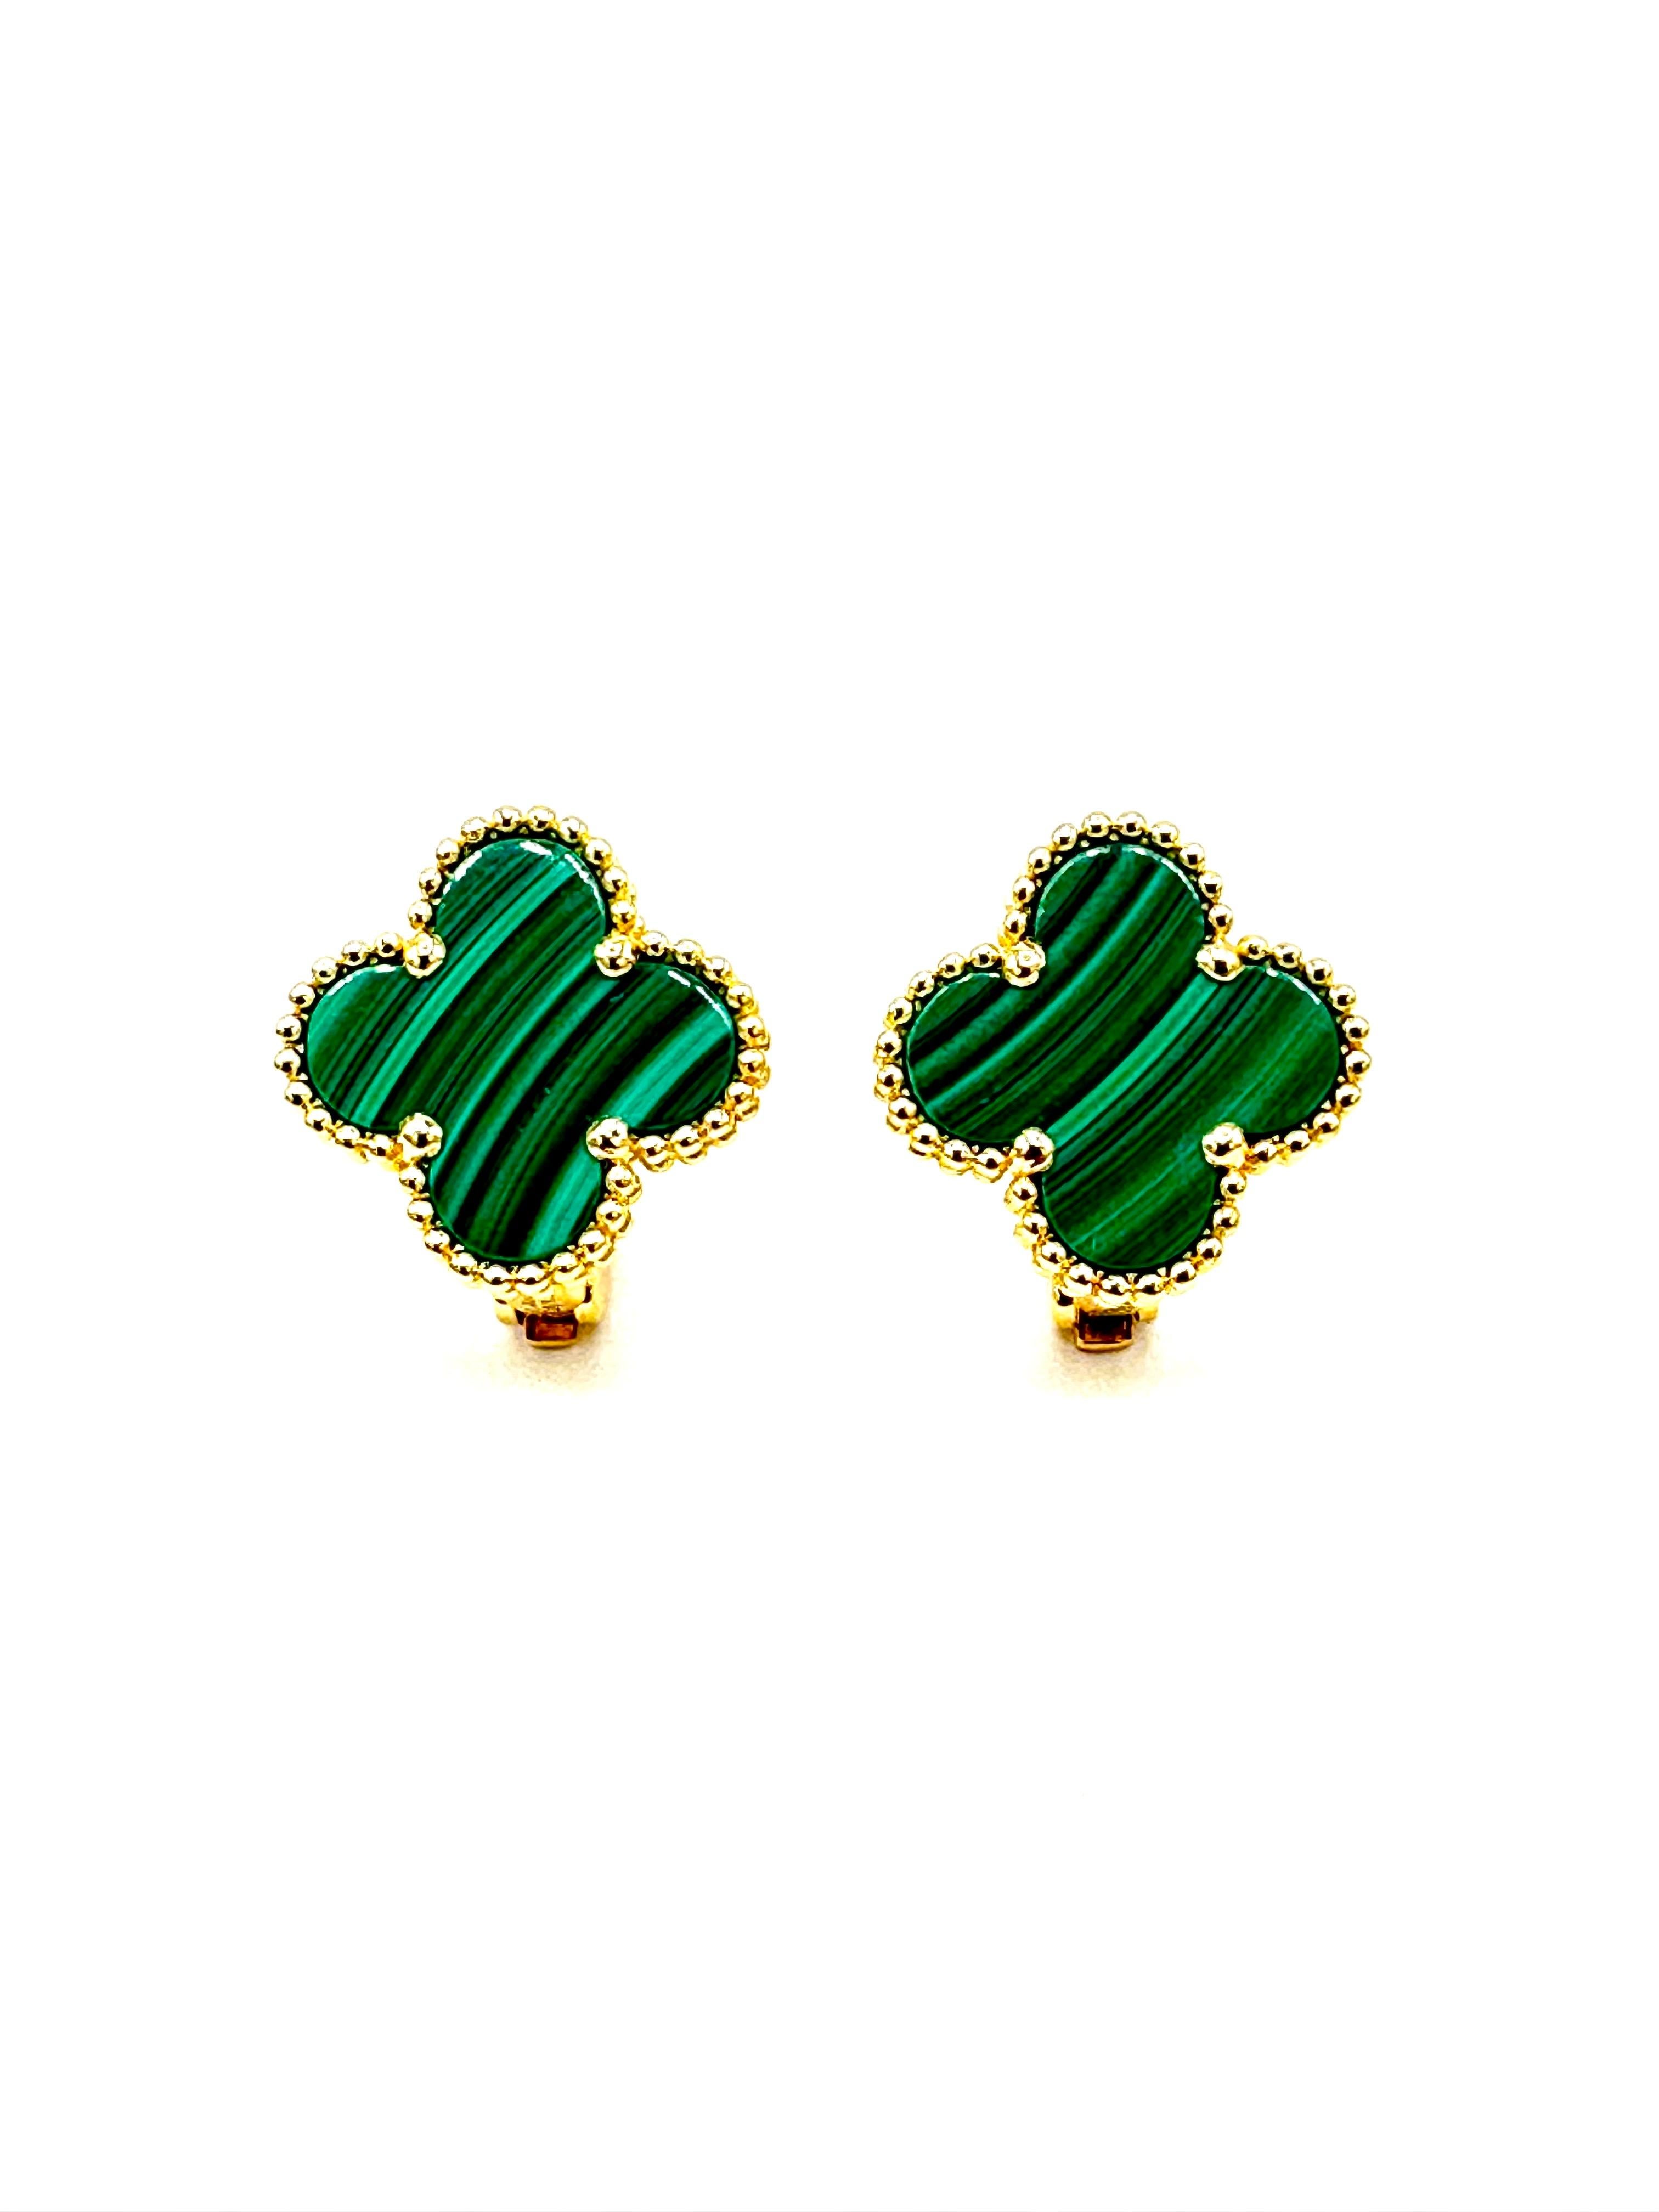 Revival Van Cleef & Arpels Vinatge Alhambra Malachite and 18K Yellow Gold Earrings  For Sale